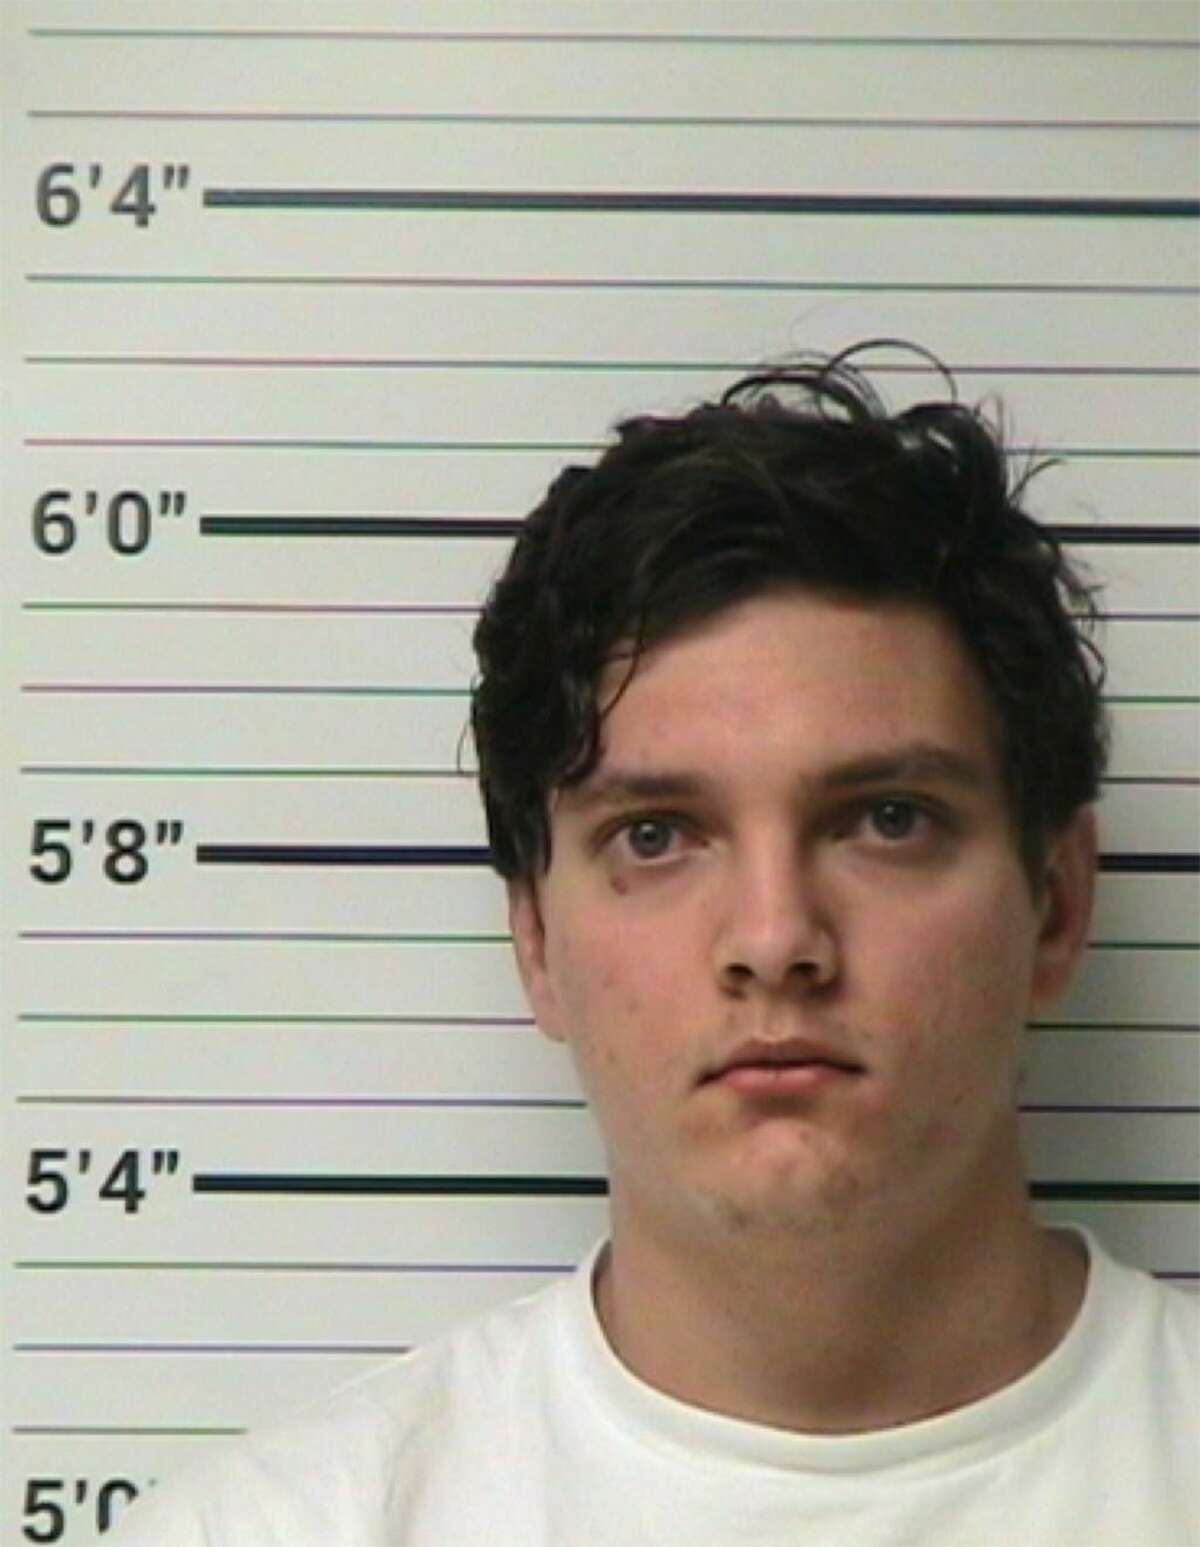 Kevin Franke, 17, of Kerrville, faces charges in the deaths of two toddlers left in a vehicle in June.